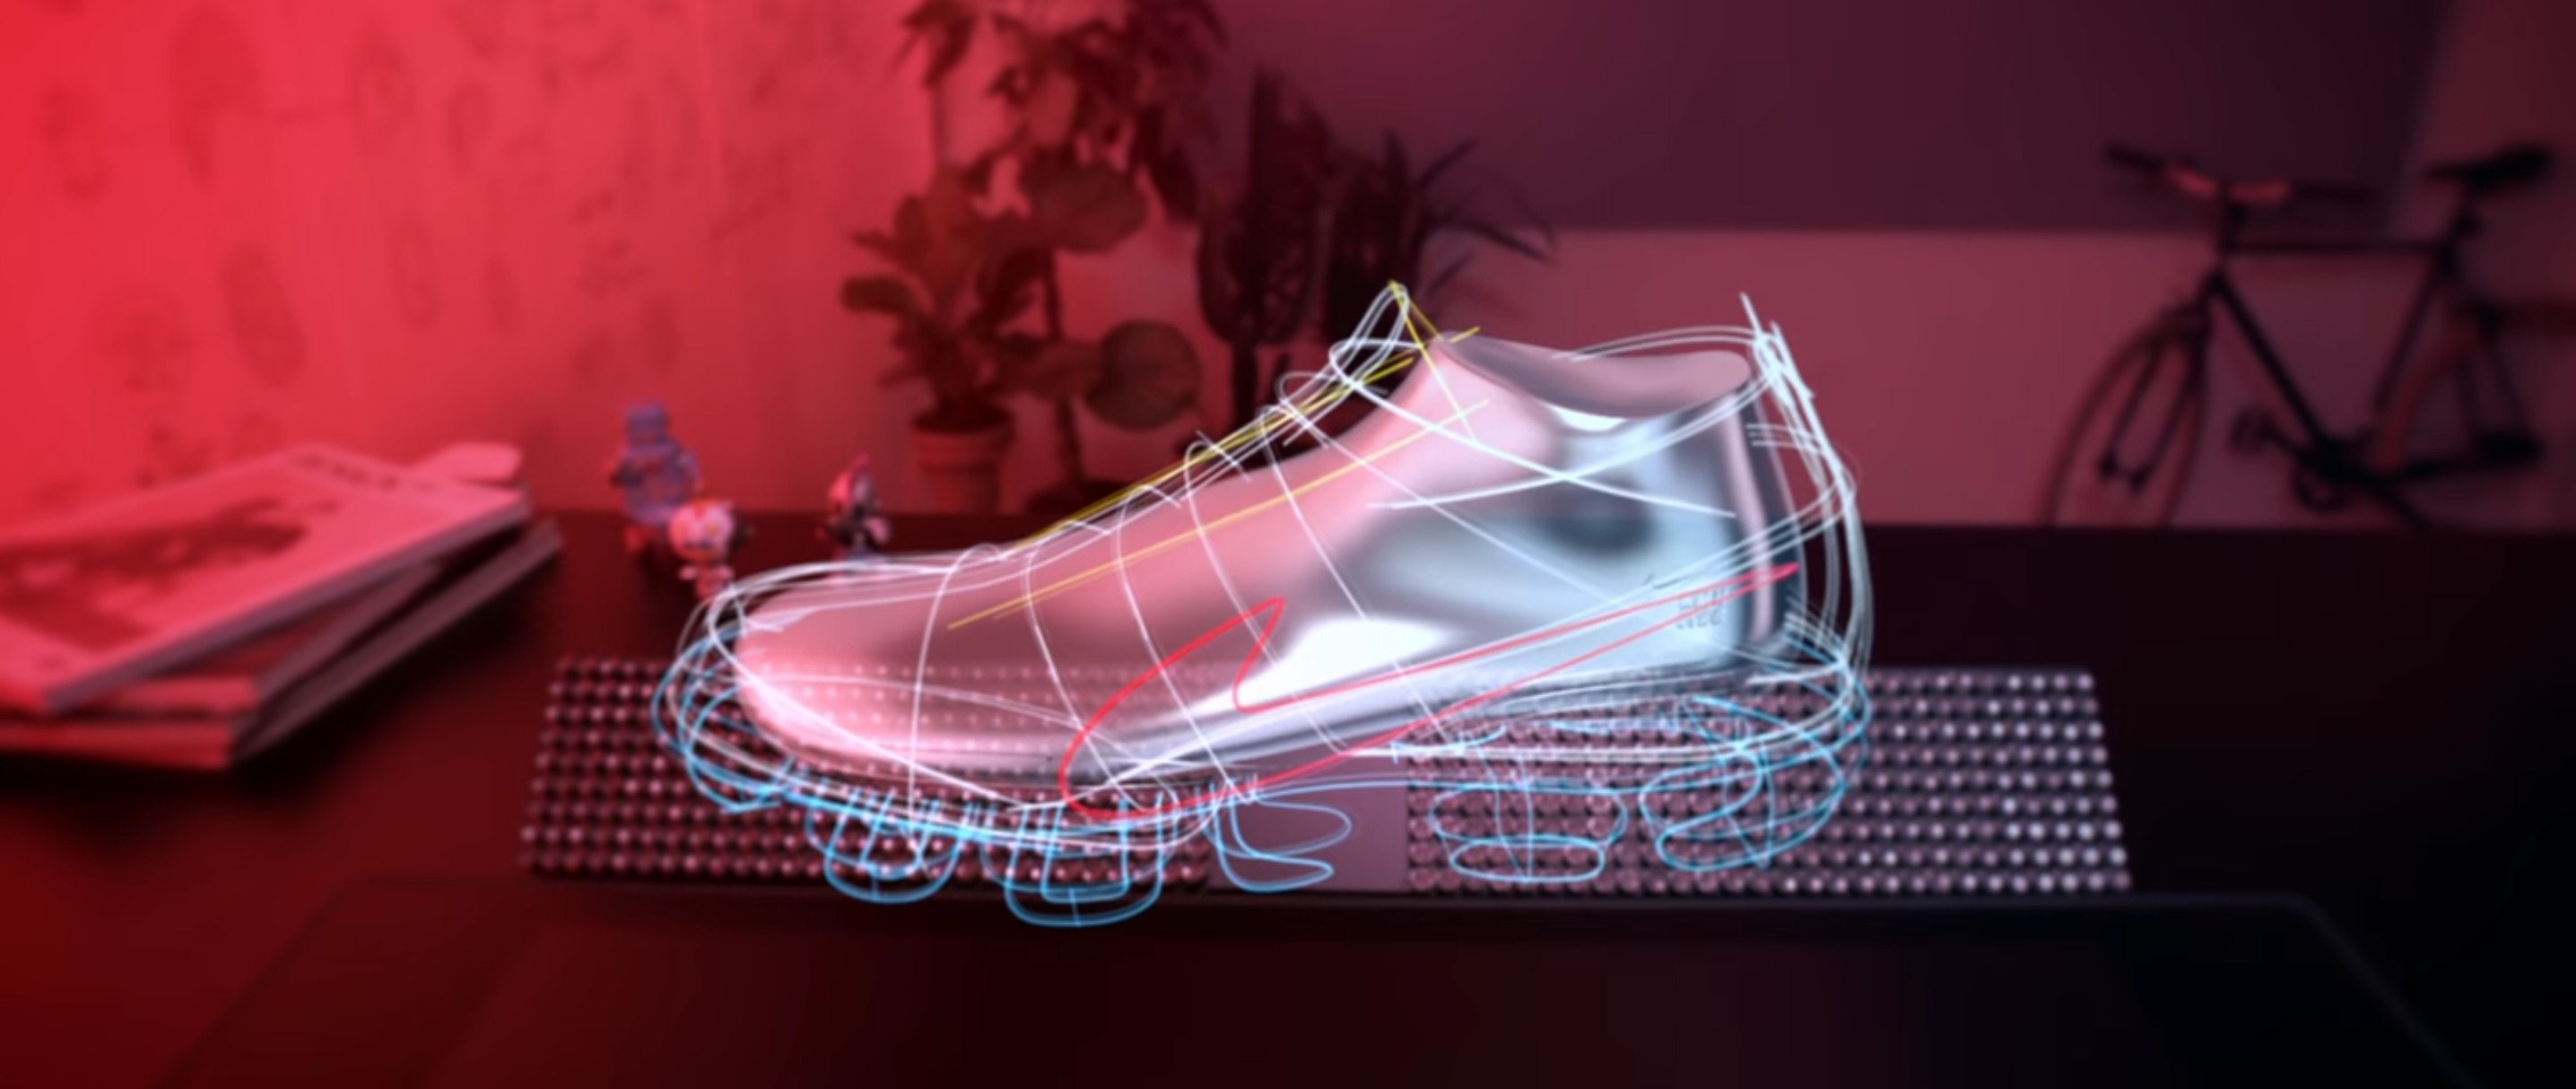 postkantoor apotheek Koninklijke familie Sports Dissected | sports from the inside out Dell and Nike Team Up for New Augmented  Reality Sneaker | sports from the inside out